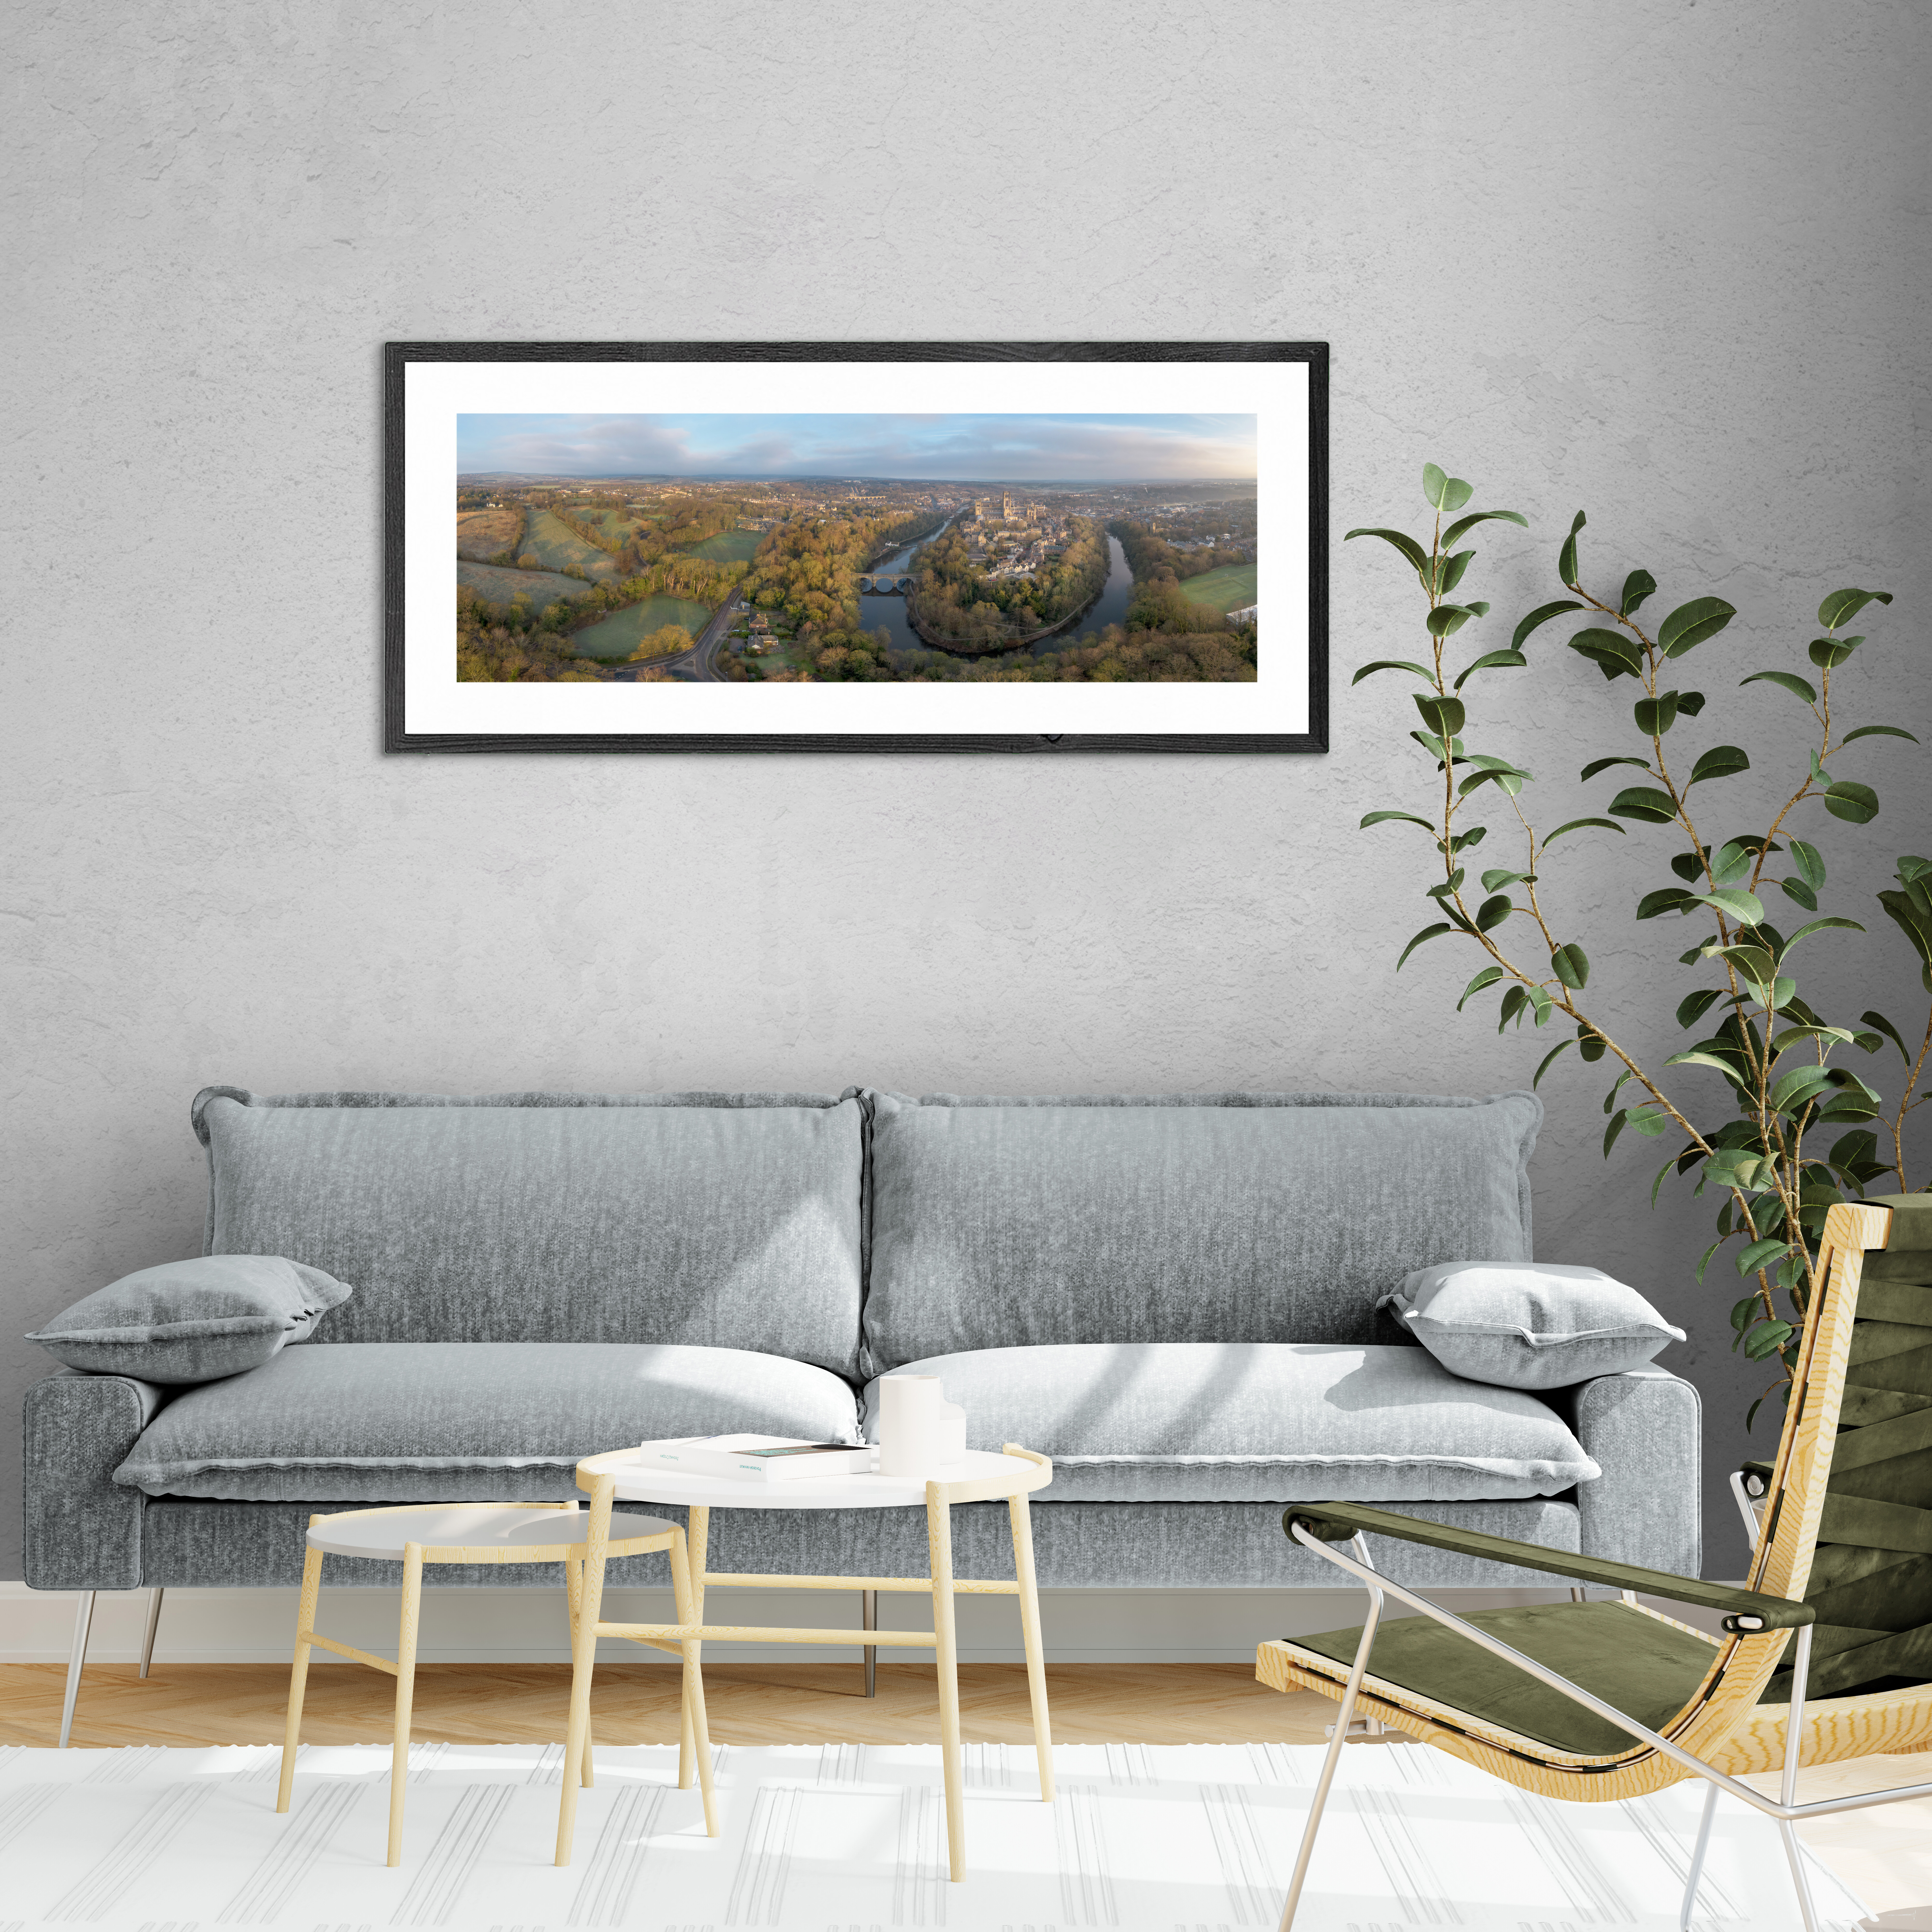 Durham Panoramic Photograph by Alchemi Art framed on a room wall